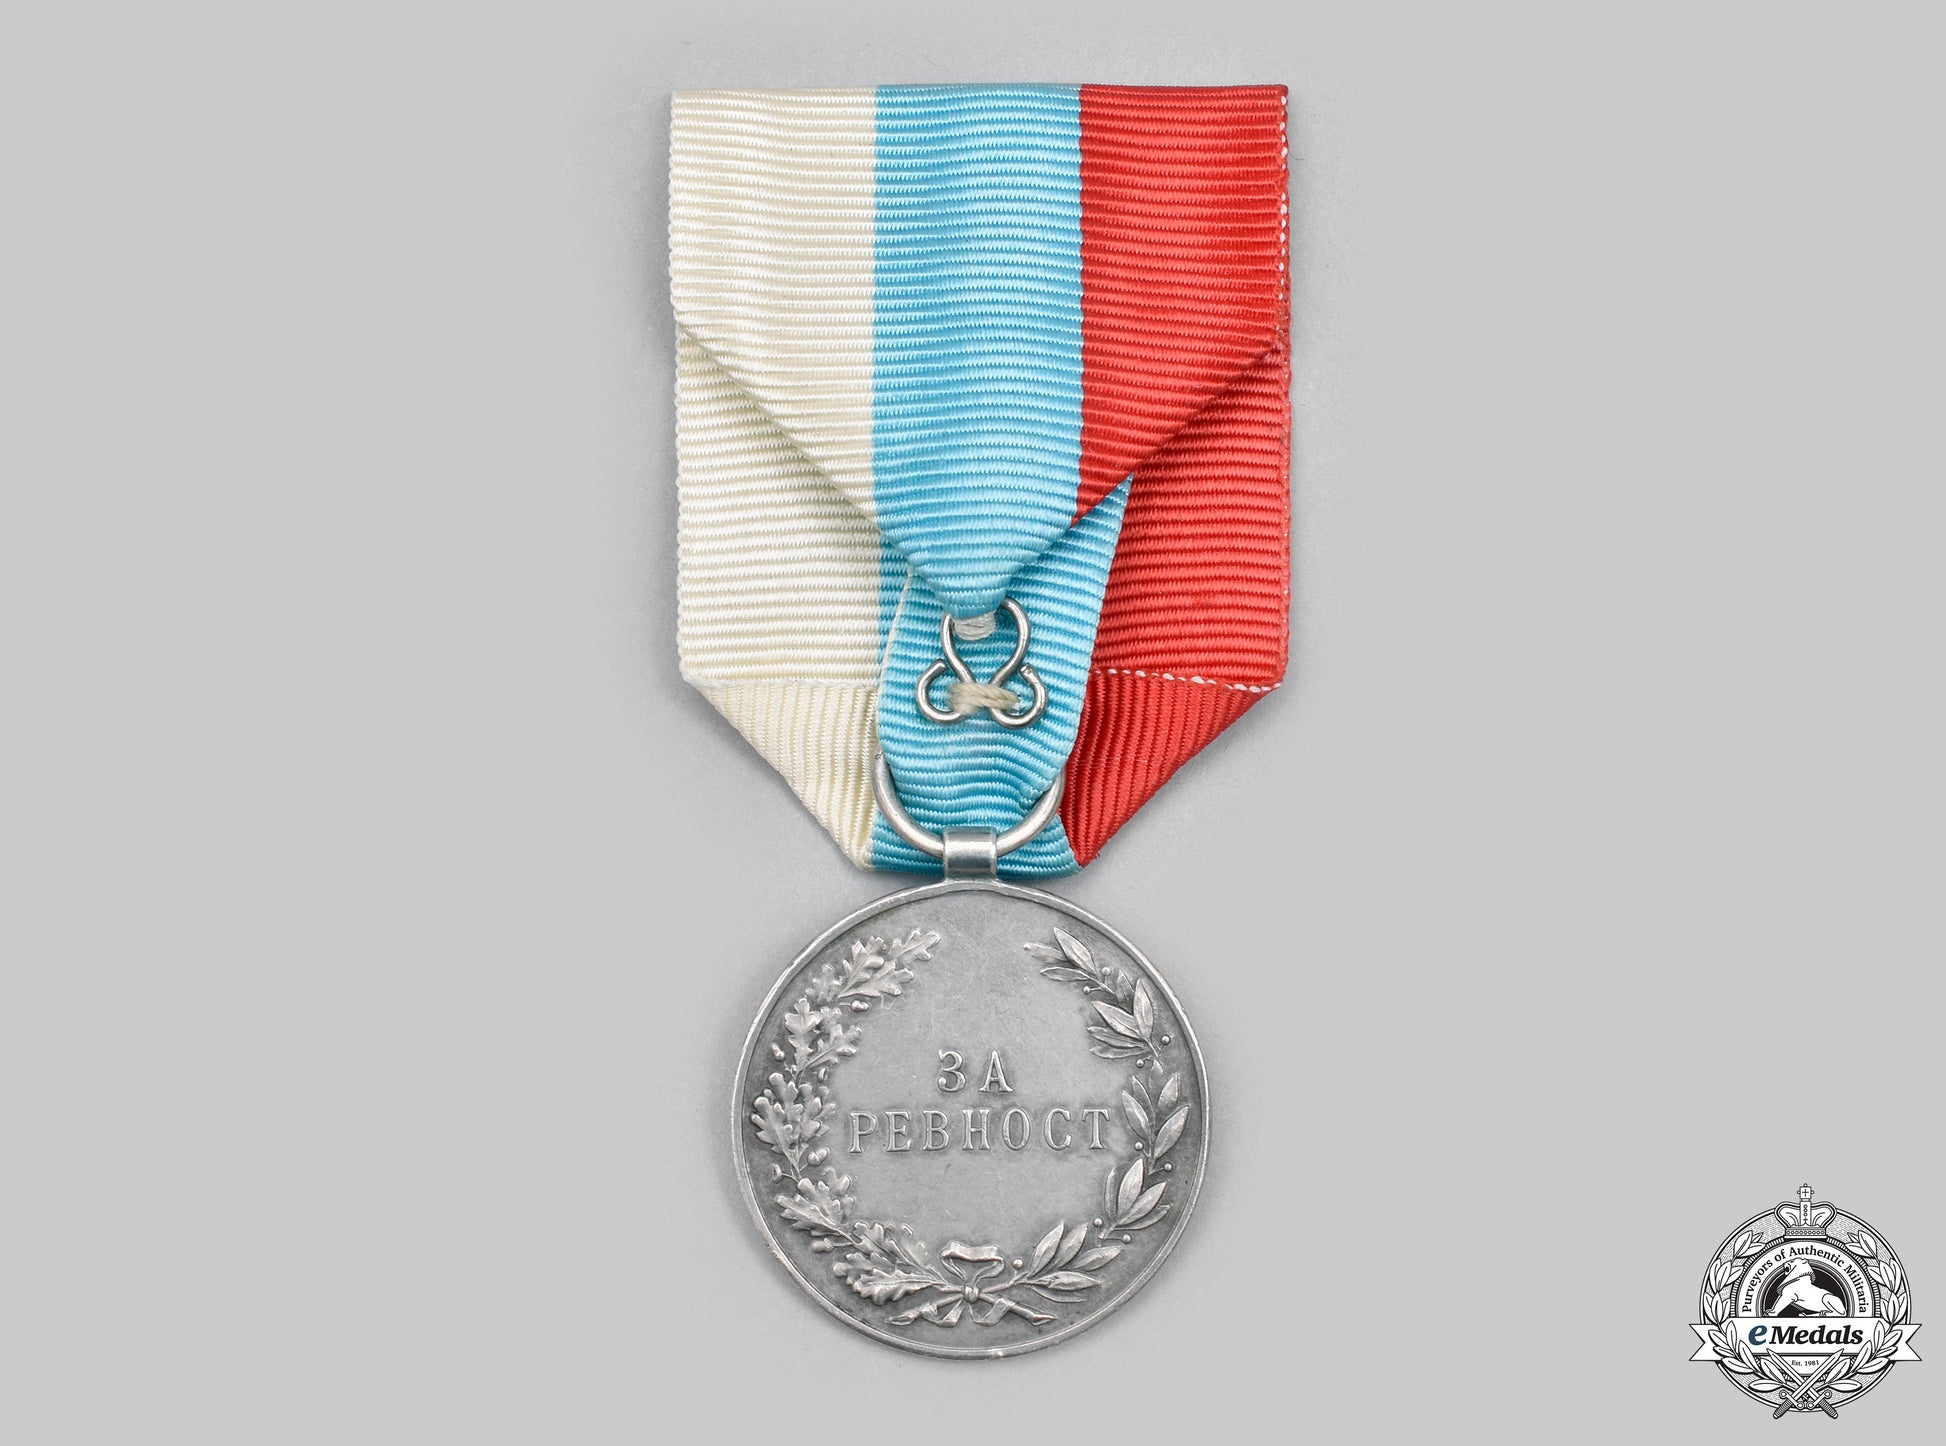 montenegro,_kingdom._a_medal_for_zeal,_ii_class_silver_grade,_c.1900_cic_2021_176_mnc9762_1_1